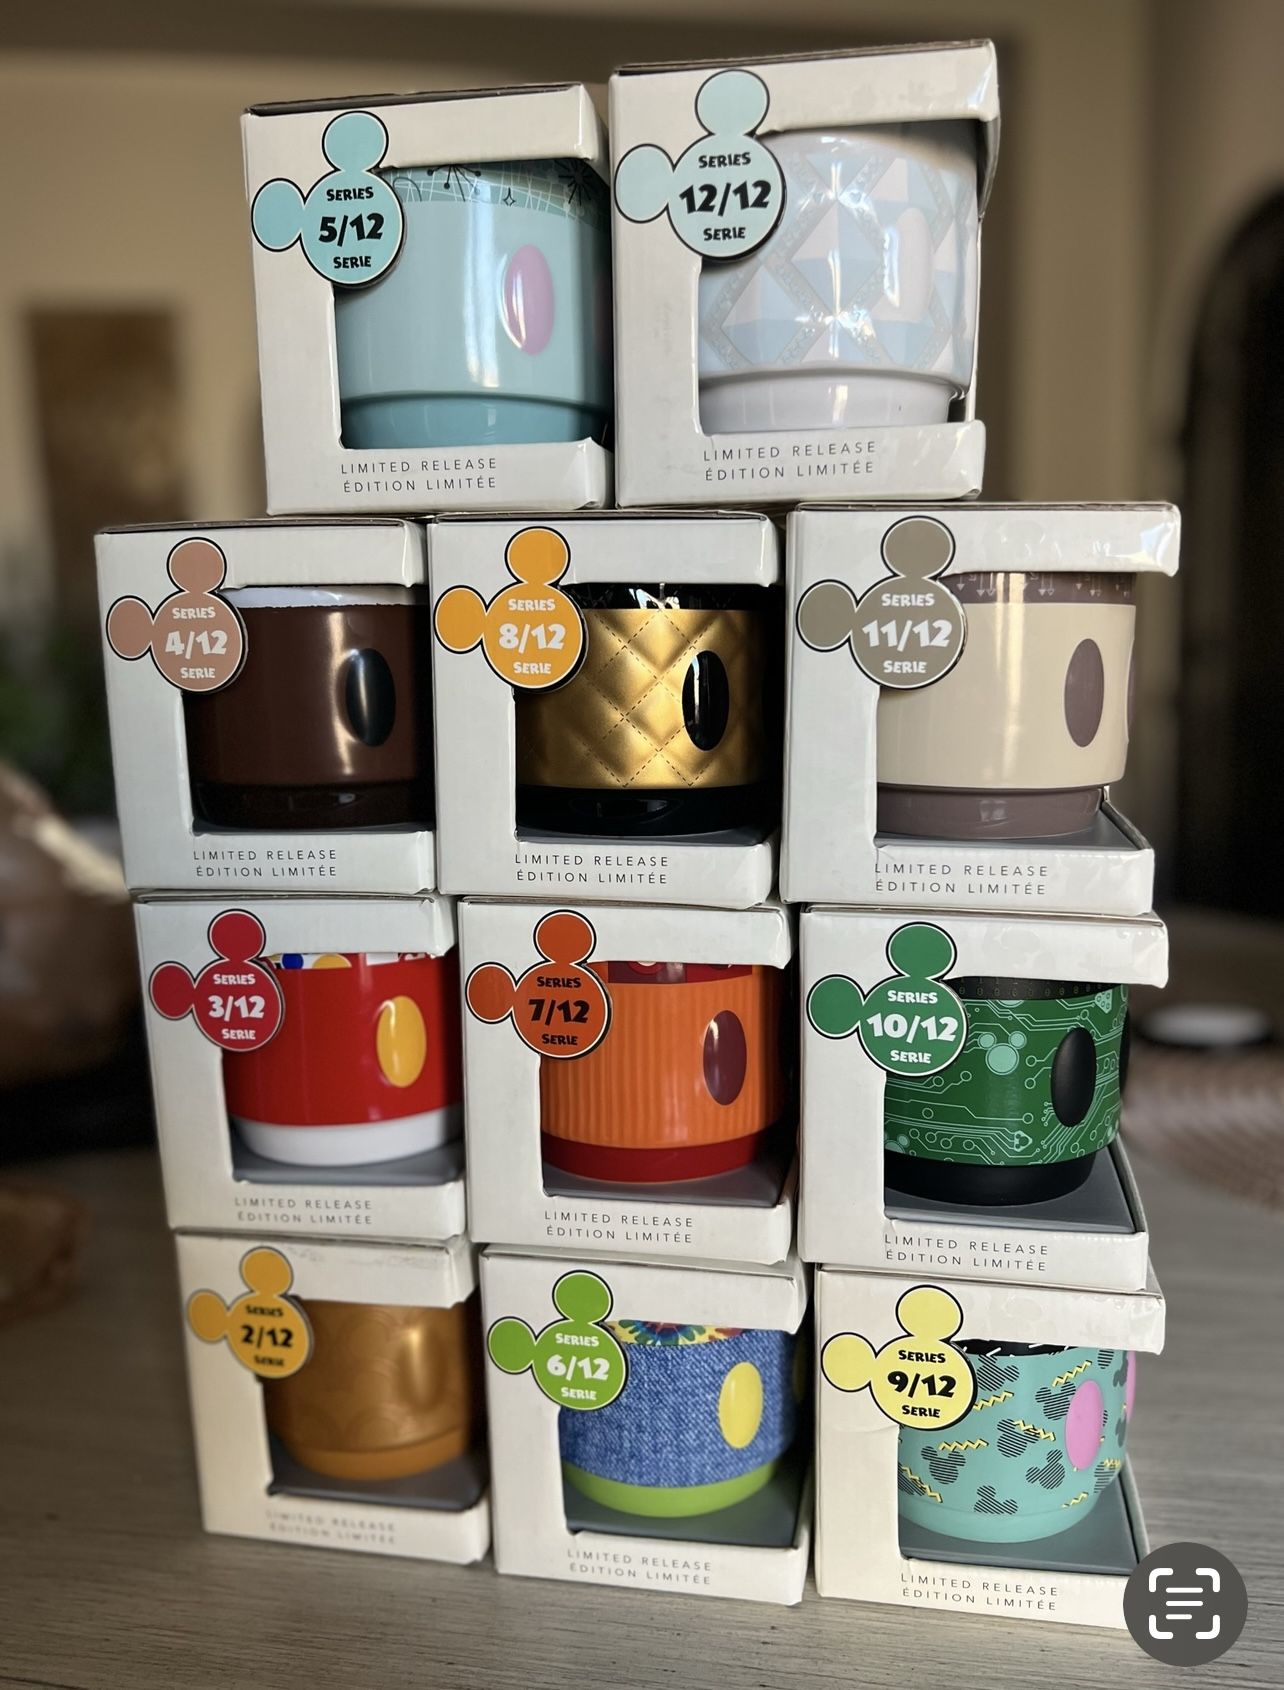 *** Disney Collectors *** 2018 Limited Edition Mickey Mouse Memories Collection Mugs Cups